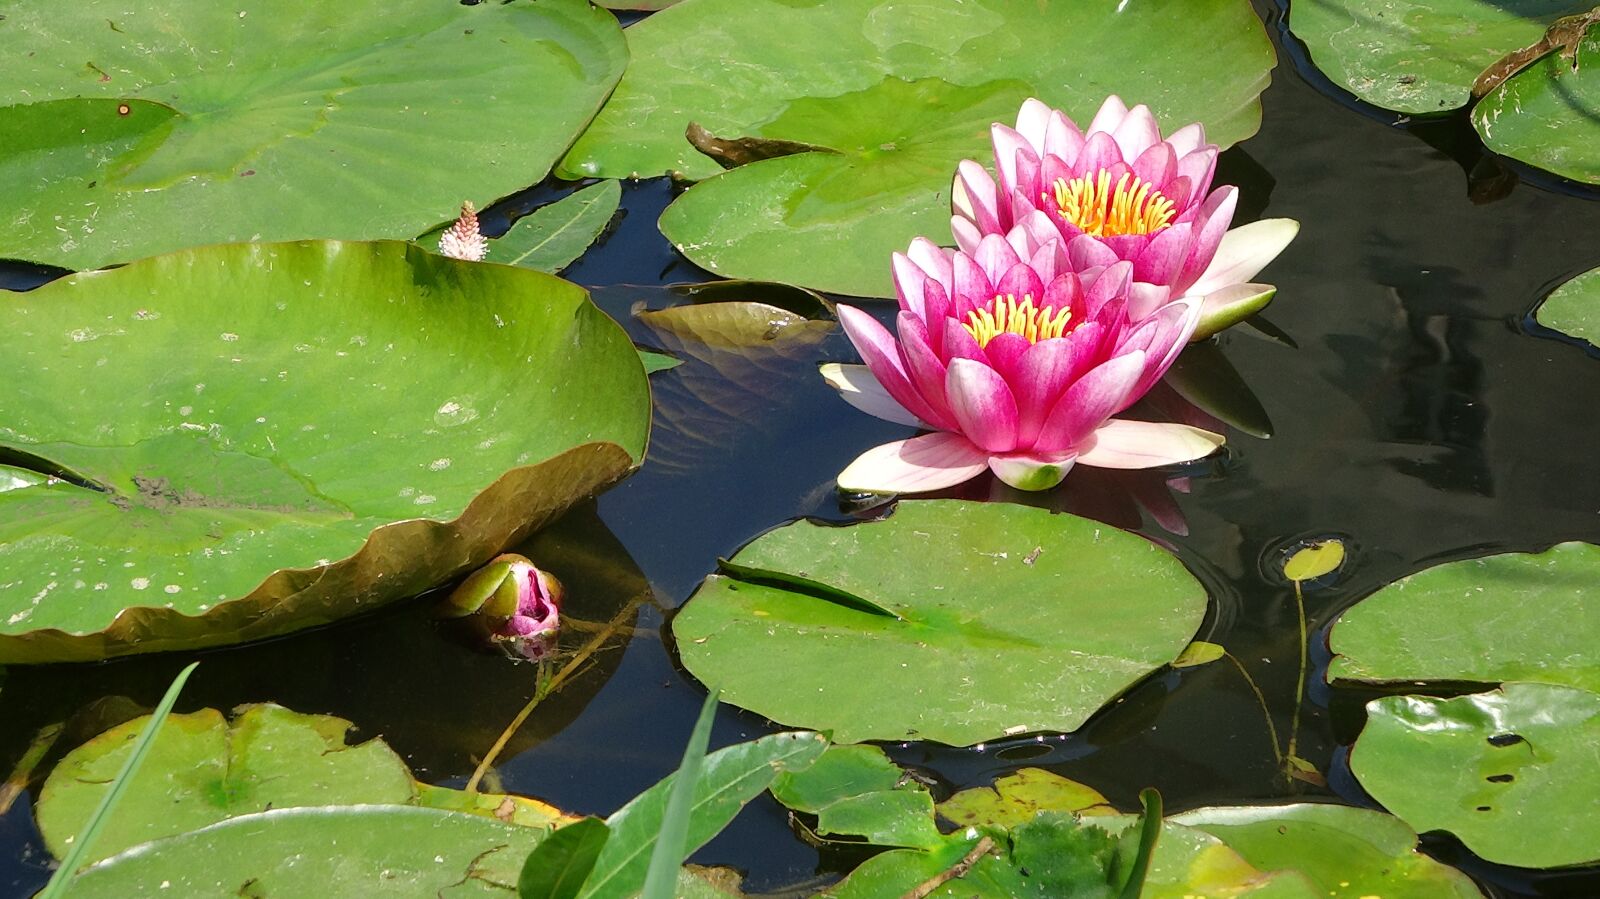 Sony Cyber-shot DSC-WX300 sample photo. Water lilies, flowers, nature photography